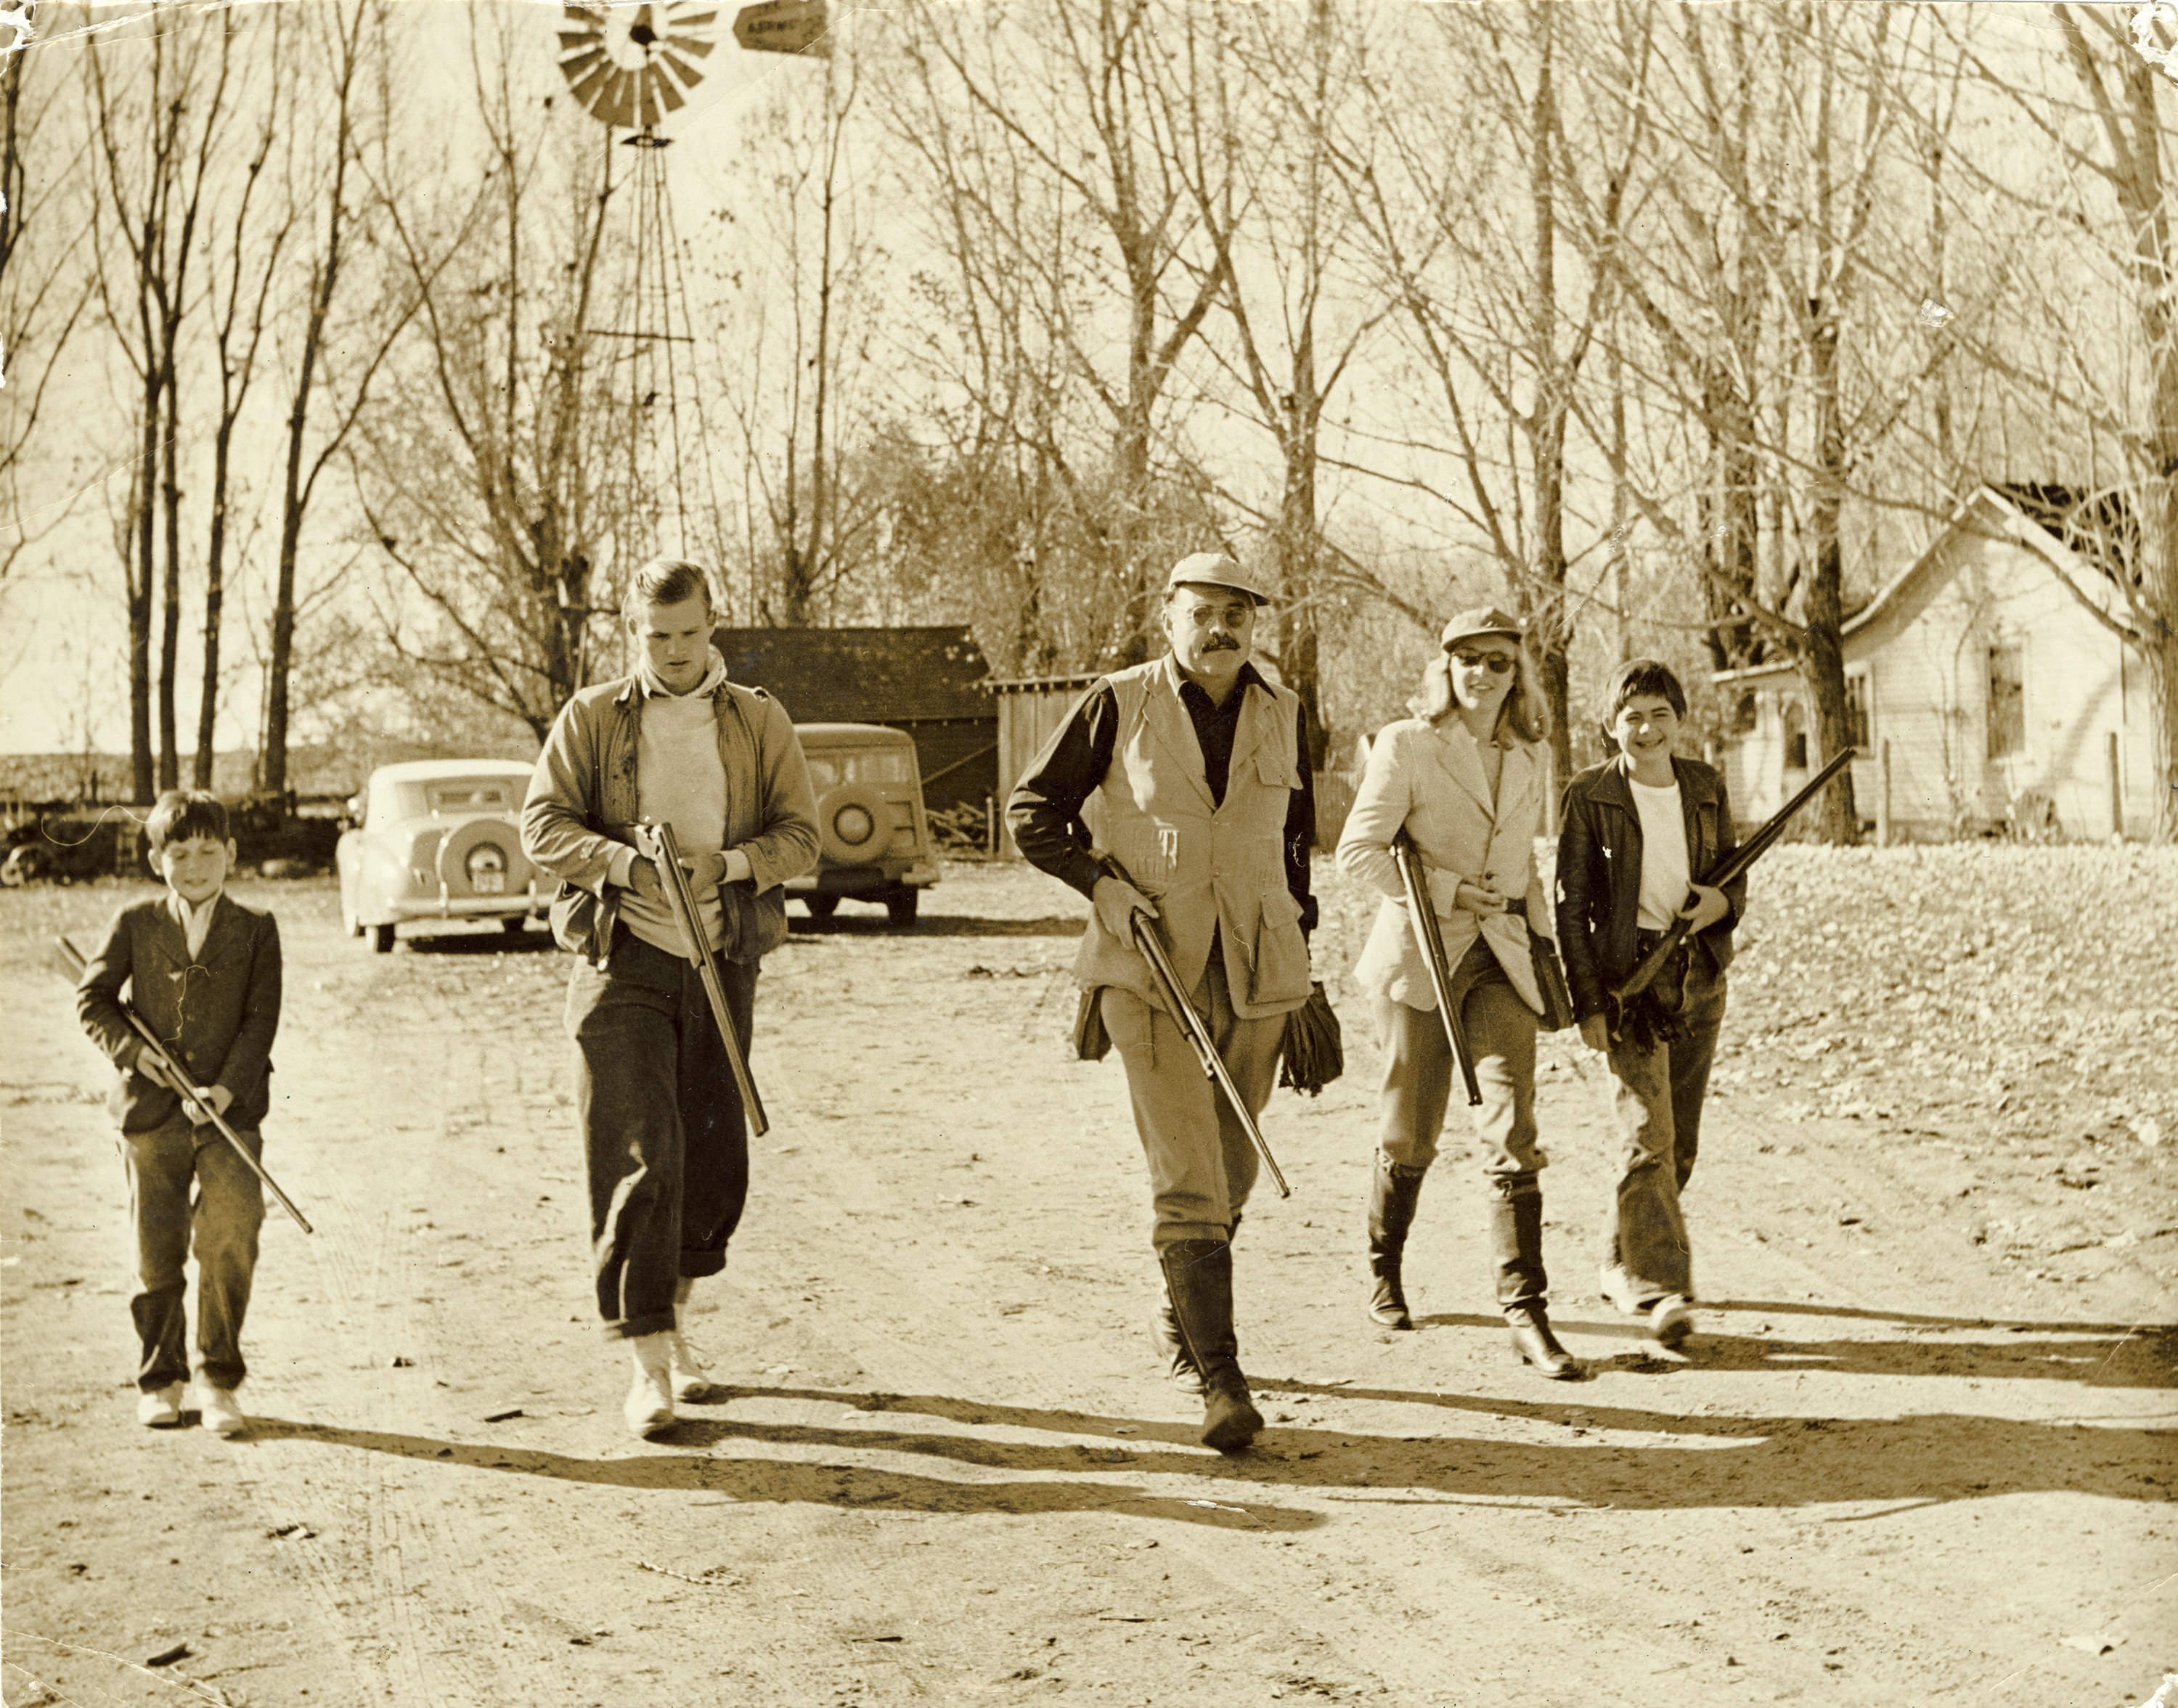 A sepia image of Gregory, Jack, Ernest, and Patrick Hemingway with Martha Gellhorn.  They are all carrying rifles and are dressed for hunting.  They walk toward the camera; behind them two parked cars, an outbuilding, and a white house are visible.  Behind those are a line of trees marking the edge of a field.